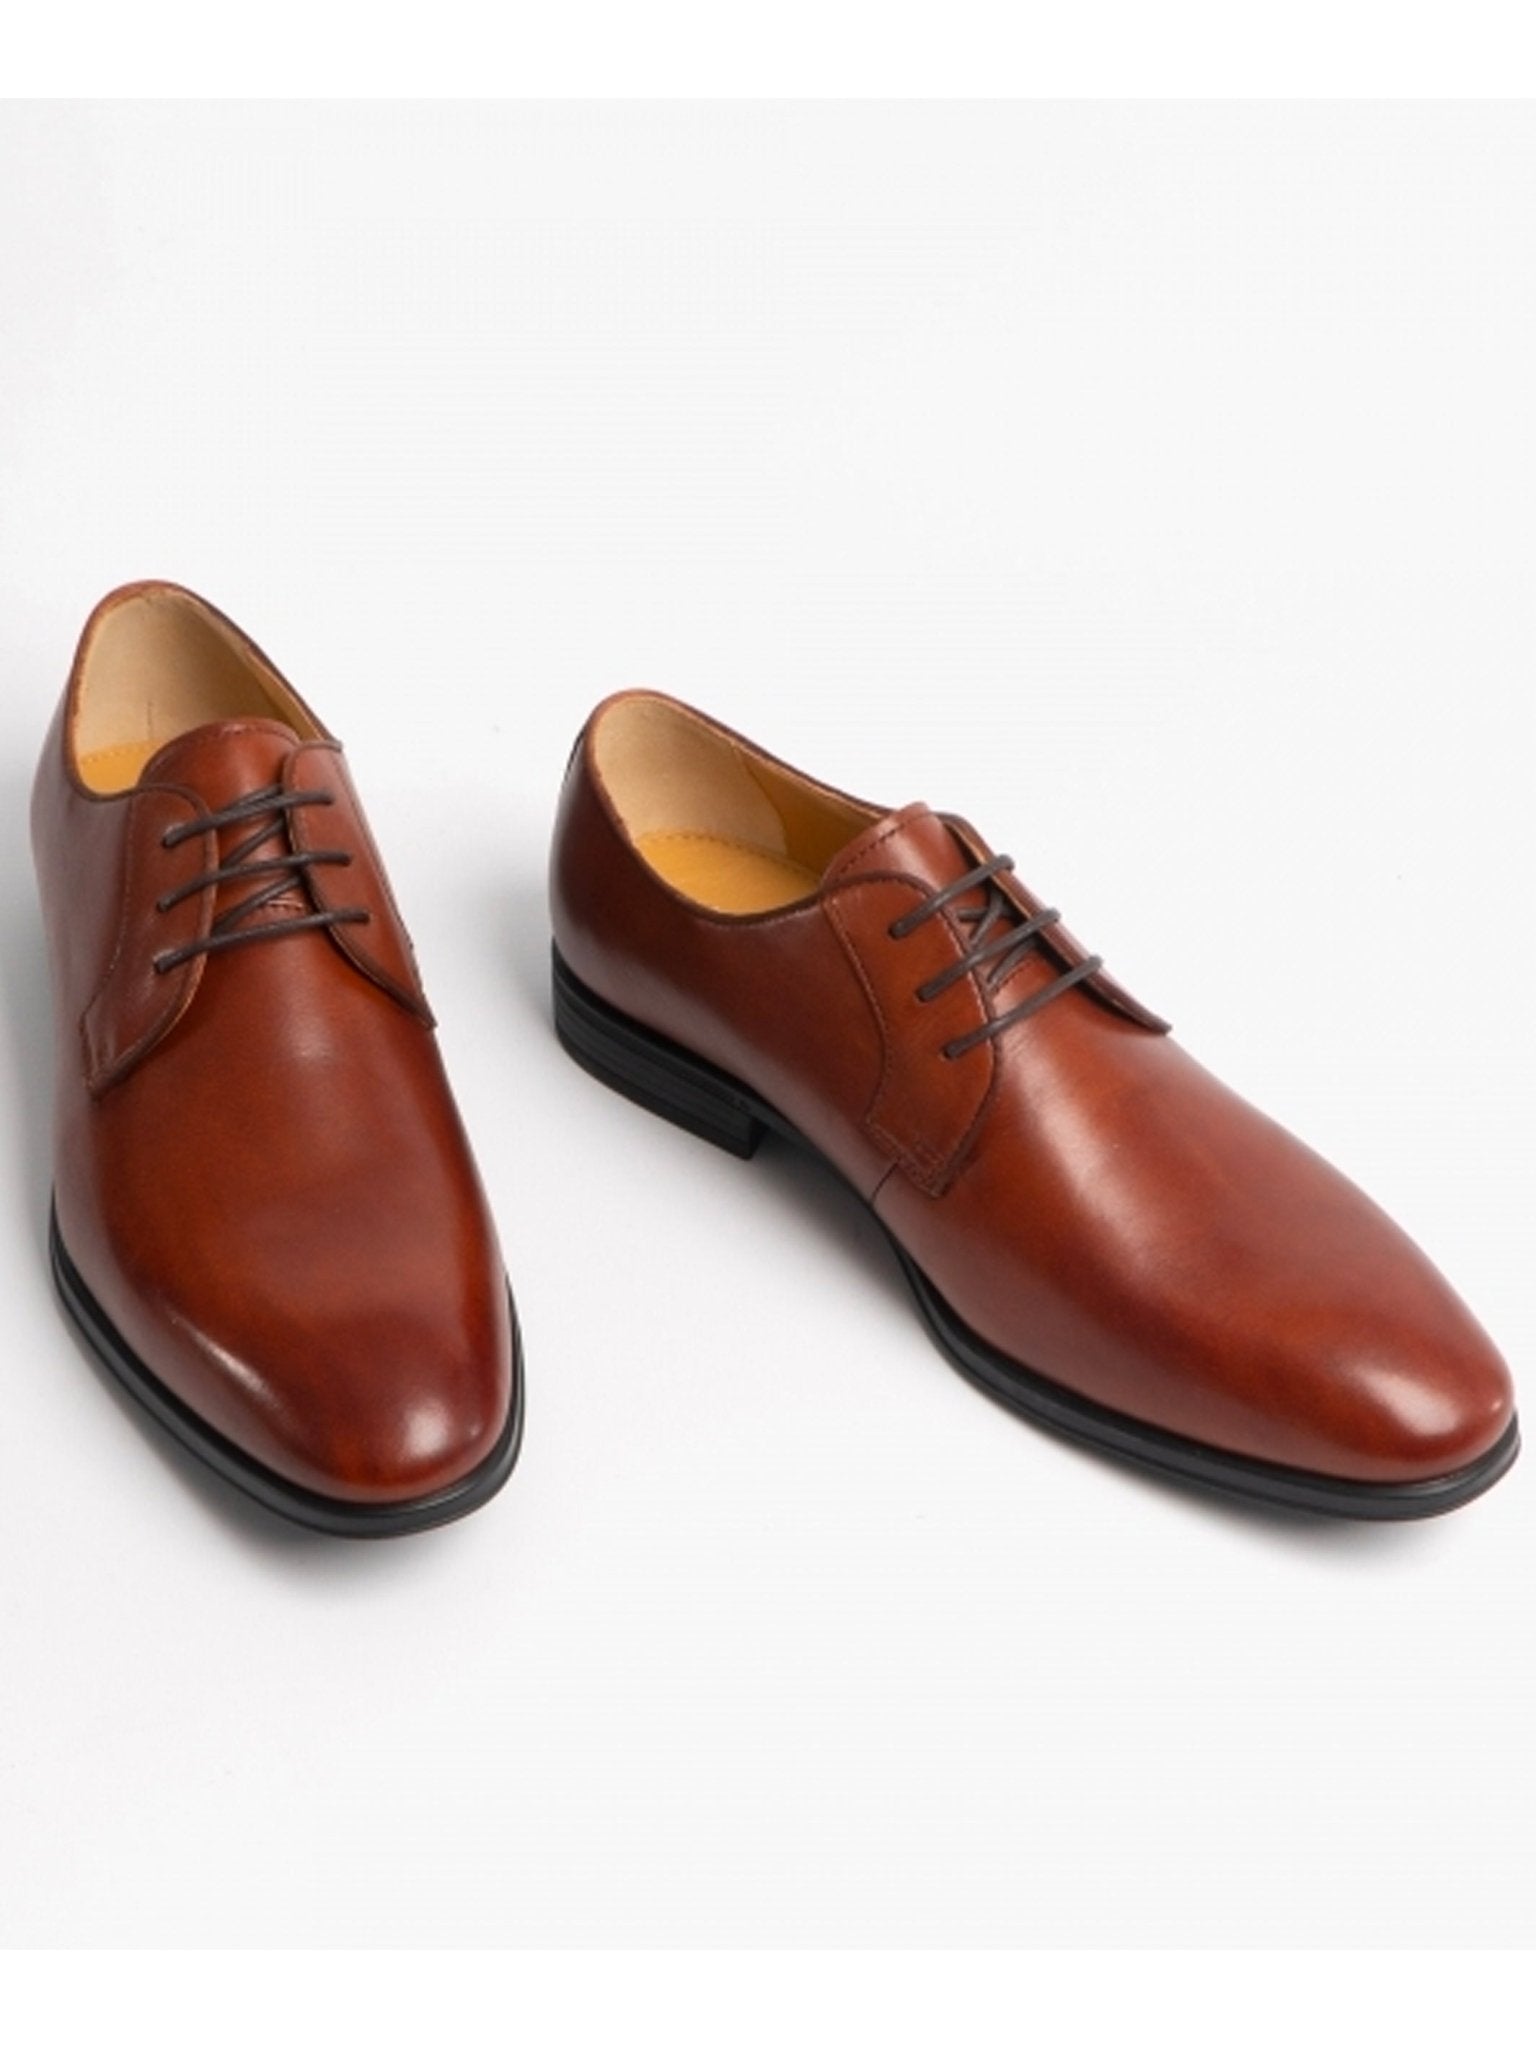 Steptronic Steptronic - Faro Mens Shoes / Waxed Leather Mens Derby Shoes Shoes